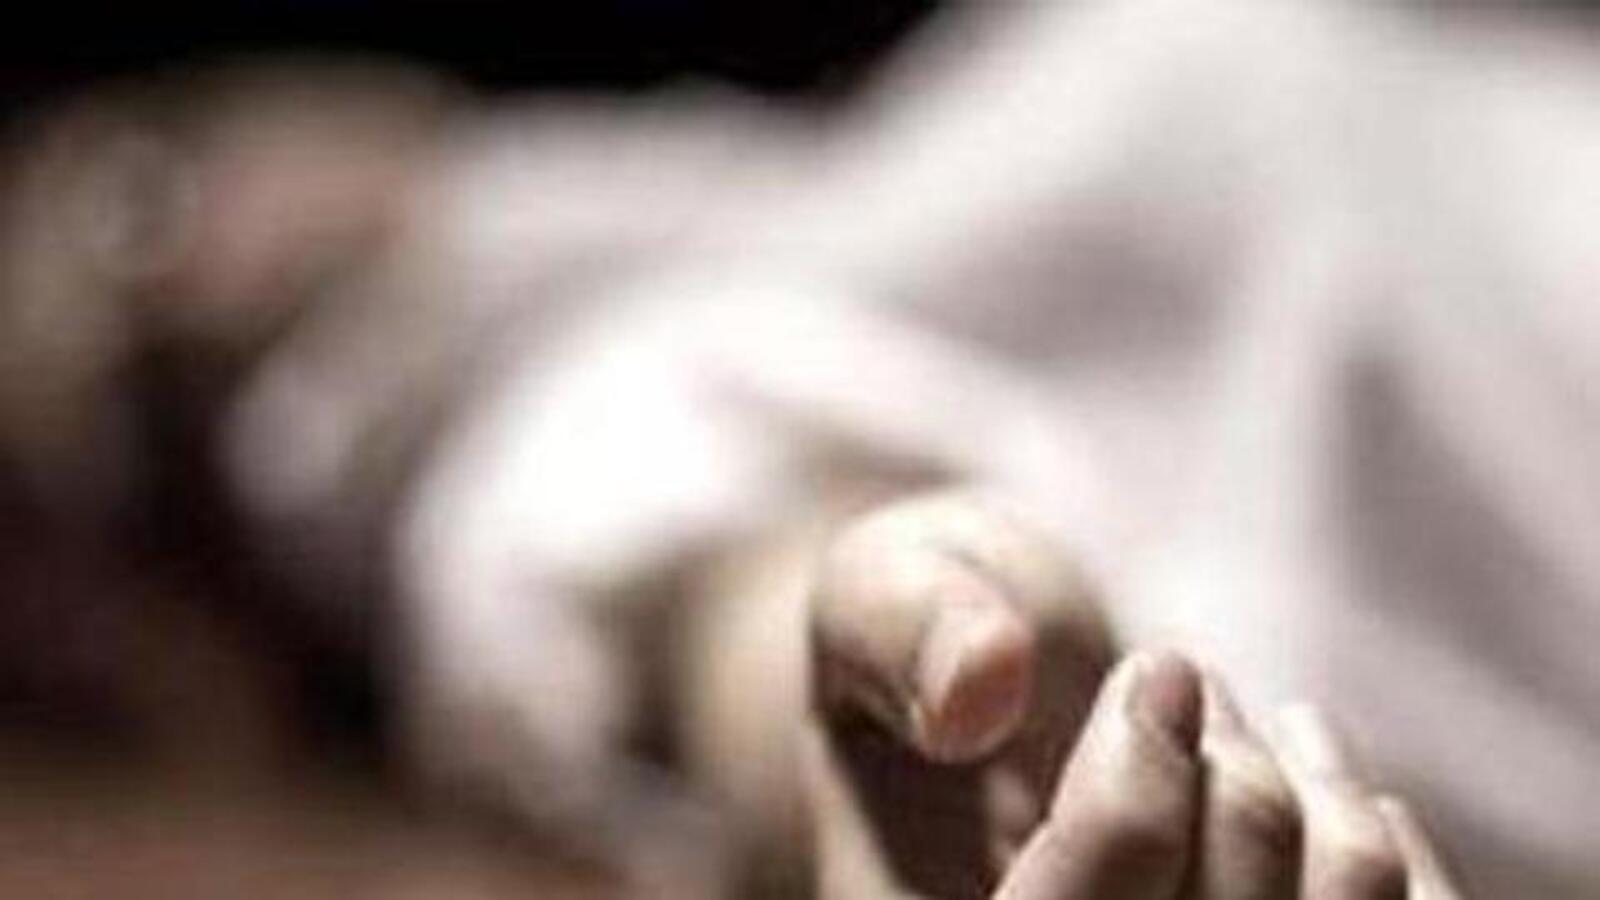 Gujarat I-T officer ‘missing’ for over a year found dead wrapped in blanket at home in Kanpur